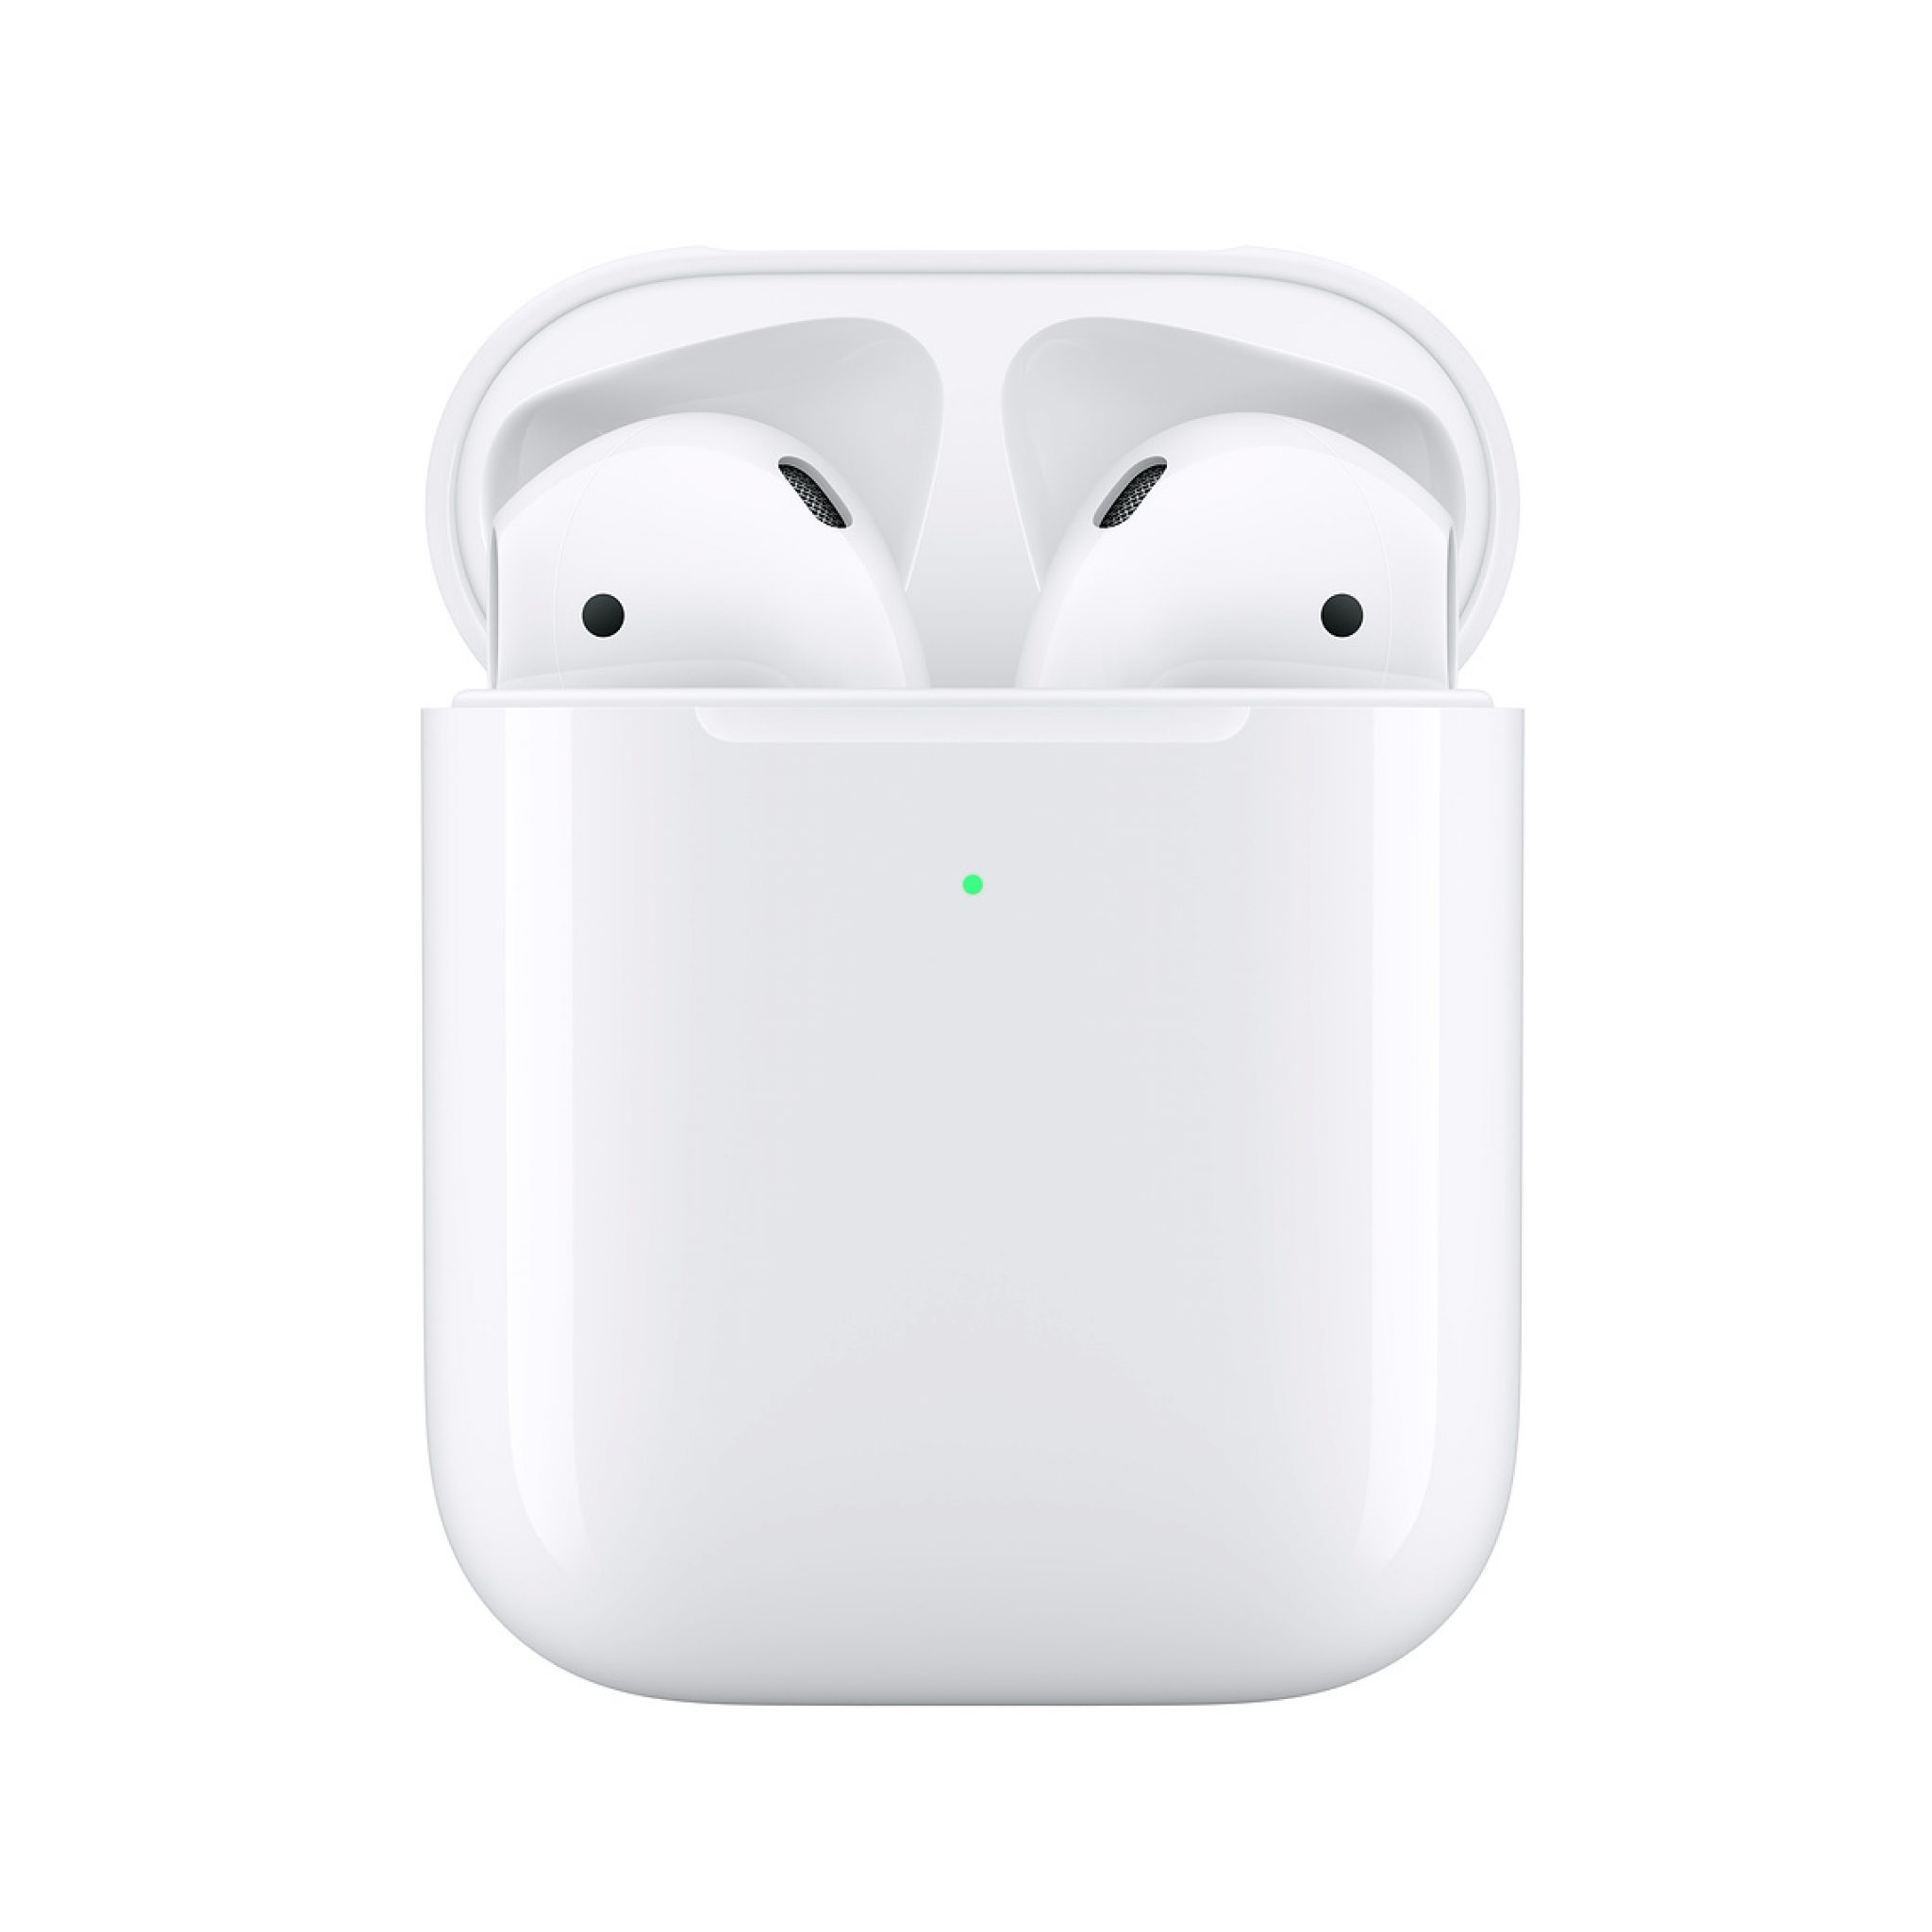 Apple AirPods Black Friday | Alle Deals & Infos | 27.11.2020 - What Price Will Airpods Be On Black Friday